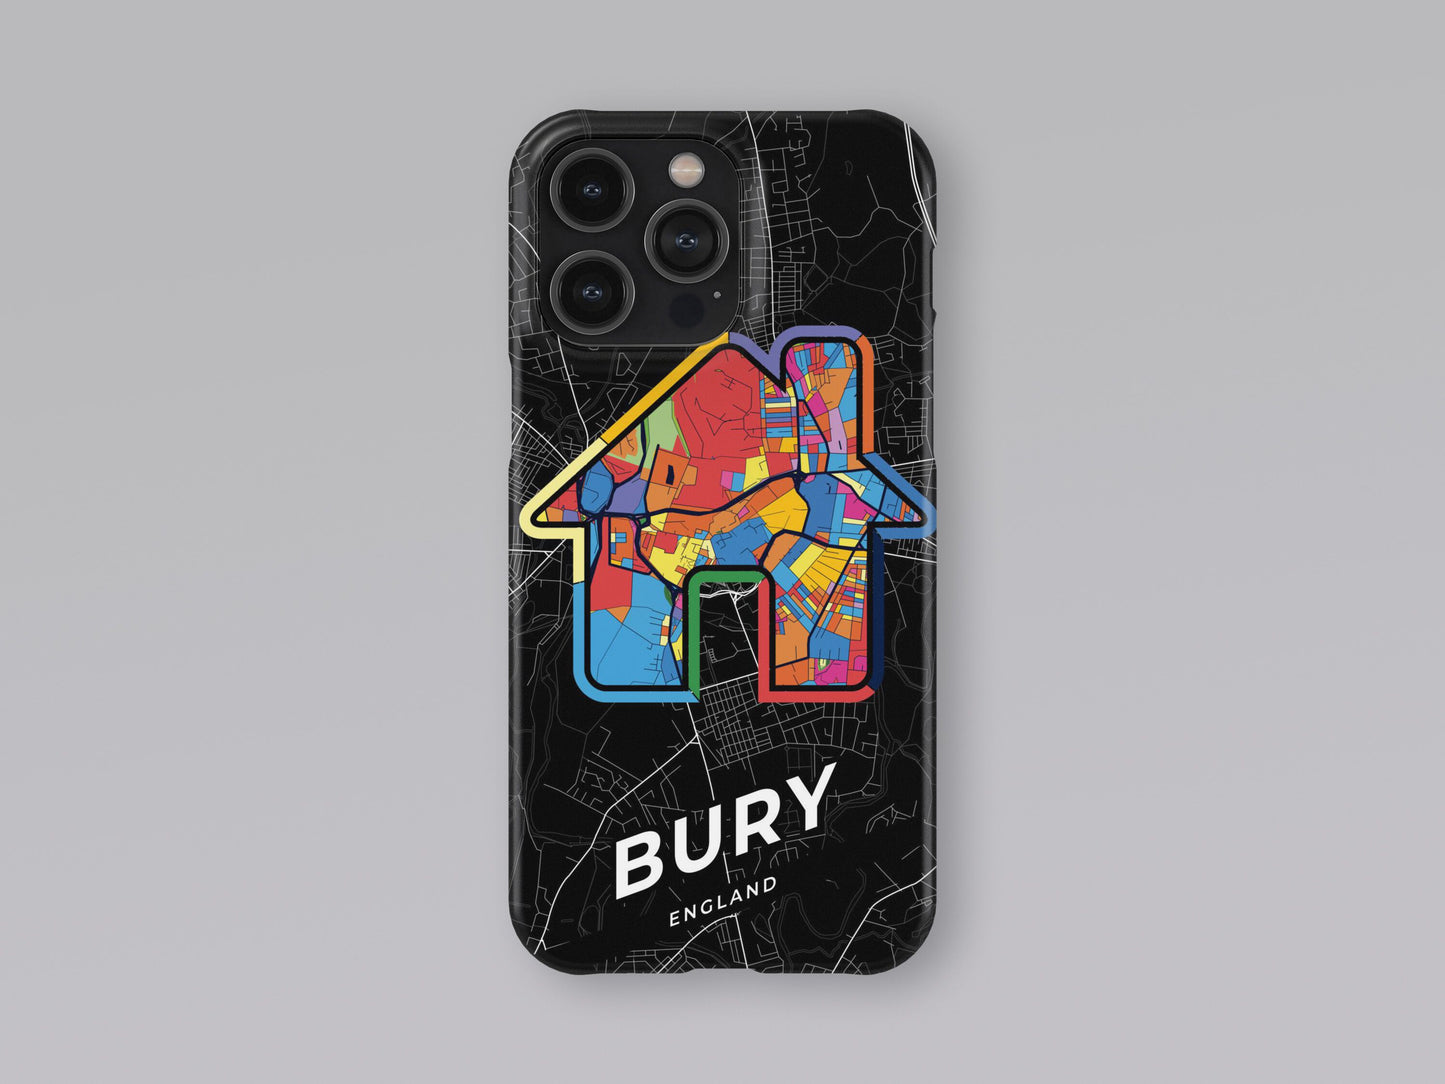 Bury England slim phone case with colorful icon. Birthday, wedding or housewarming gift. Couple match cases. 3